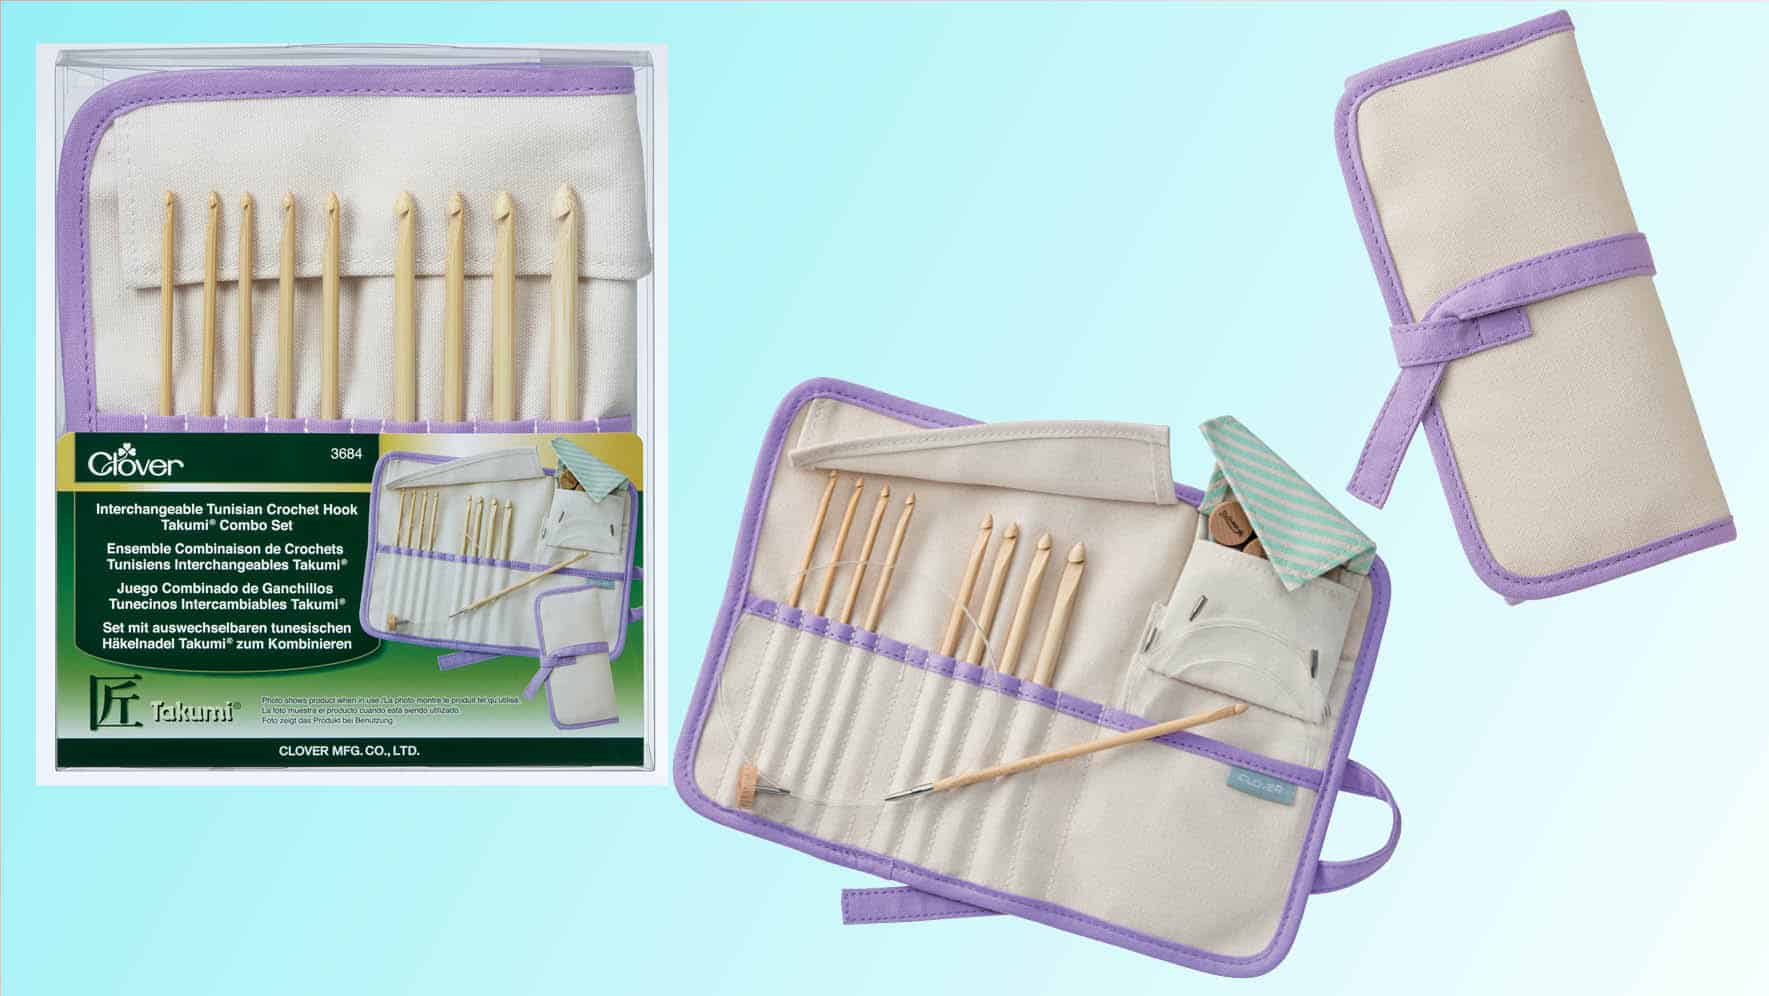 Clover Interchangeable Tunisian Crochet Hooks - Why you need them